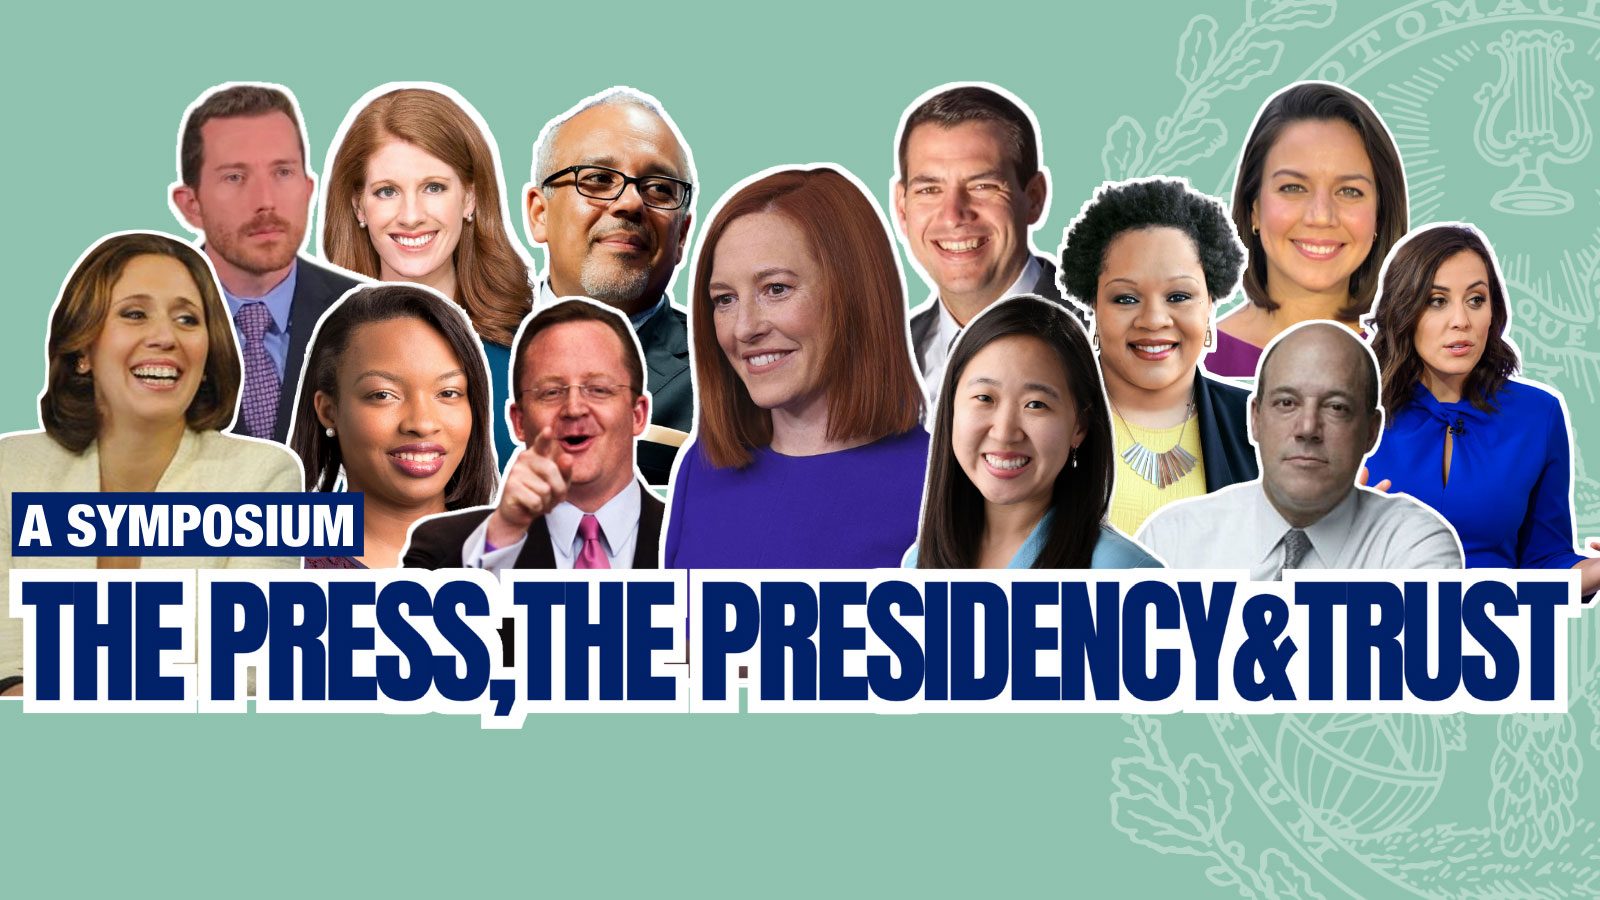 The Press, The Presidency, and Trust: A Symposium Sponsored by the Georgetown Institute of Politics and Public Service and the White House Correspondents' Association